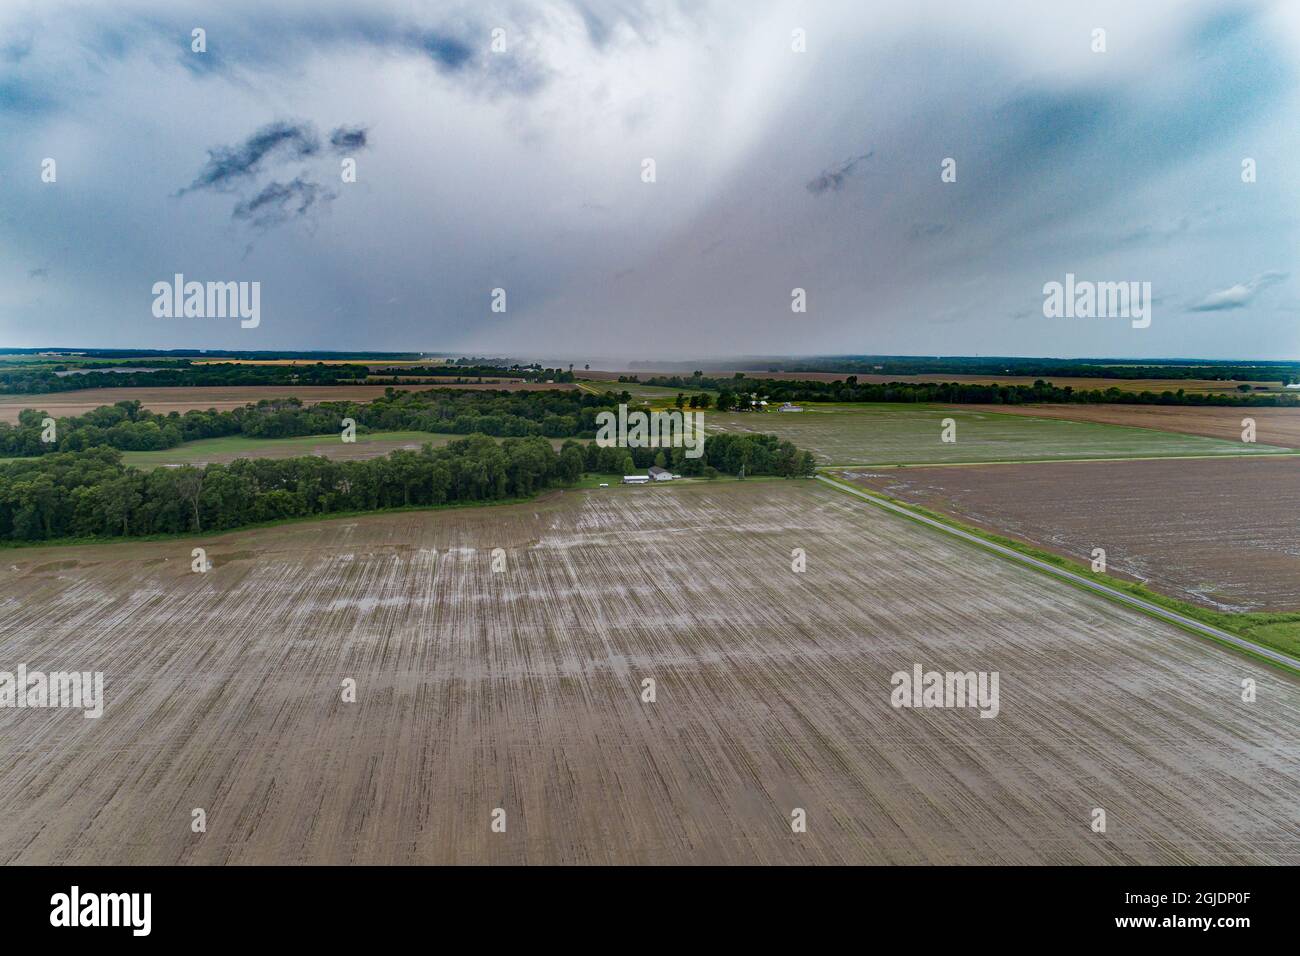 Aerial view of thunderstorm, Marion County, Illinois. Stock Photo